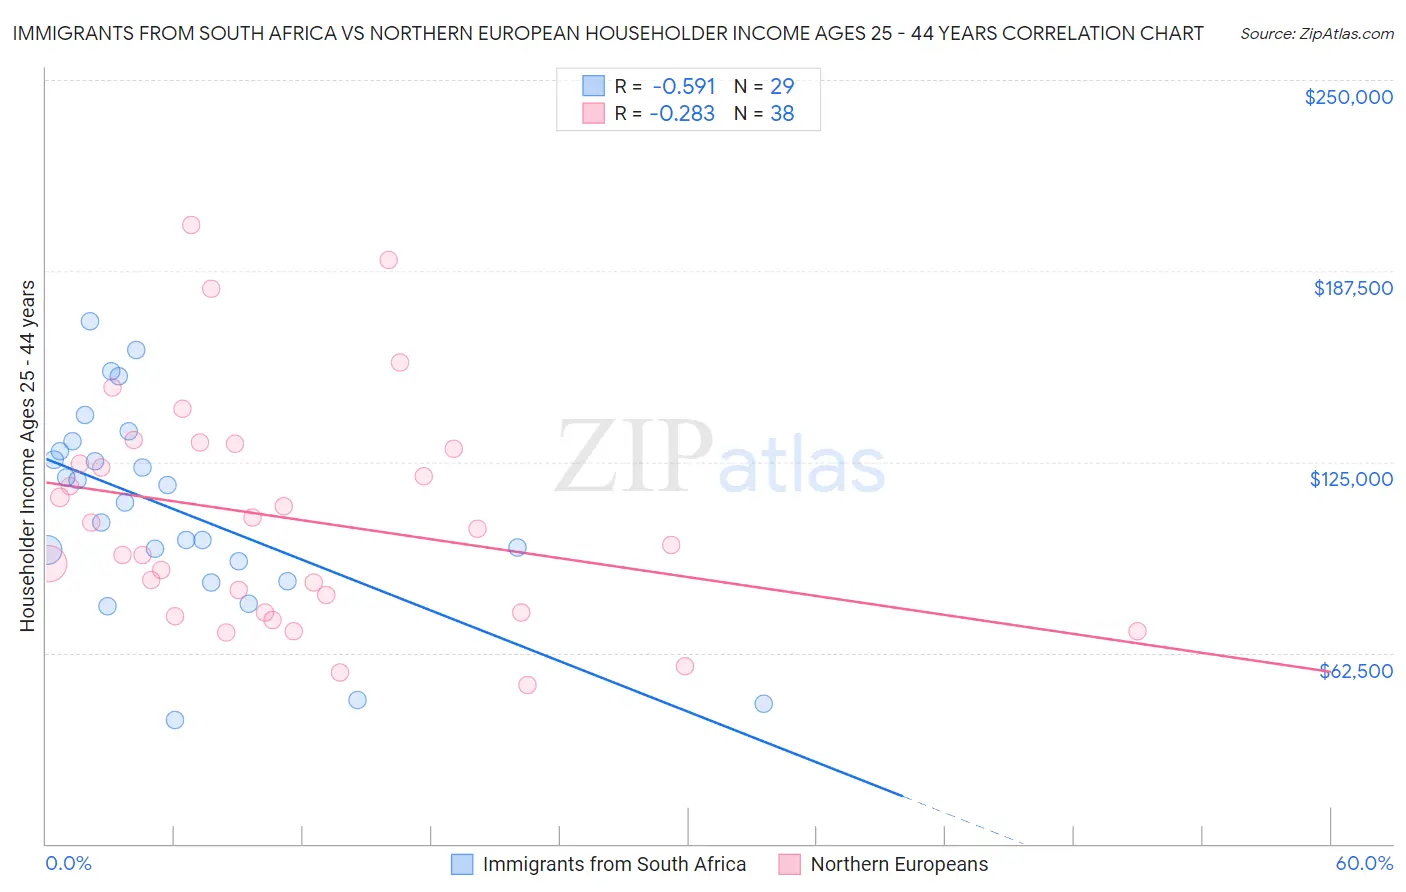 Immigrants from South Africa vs Northern European Householder Income Ages 25 - 44 years